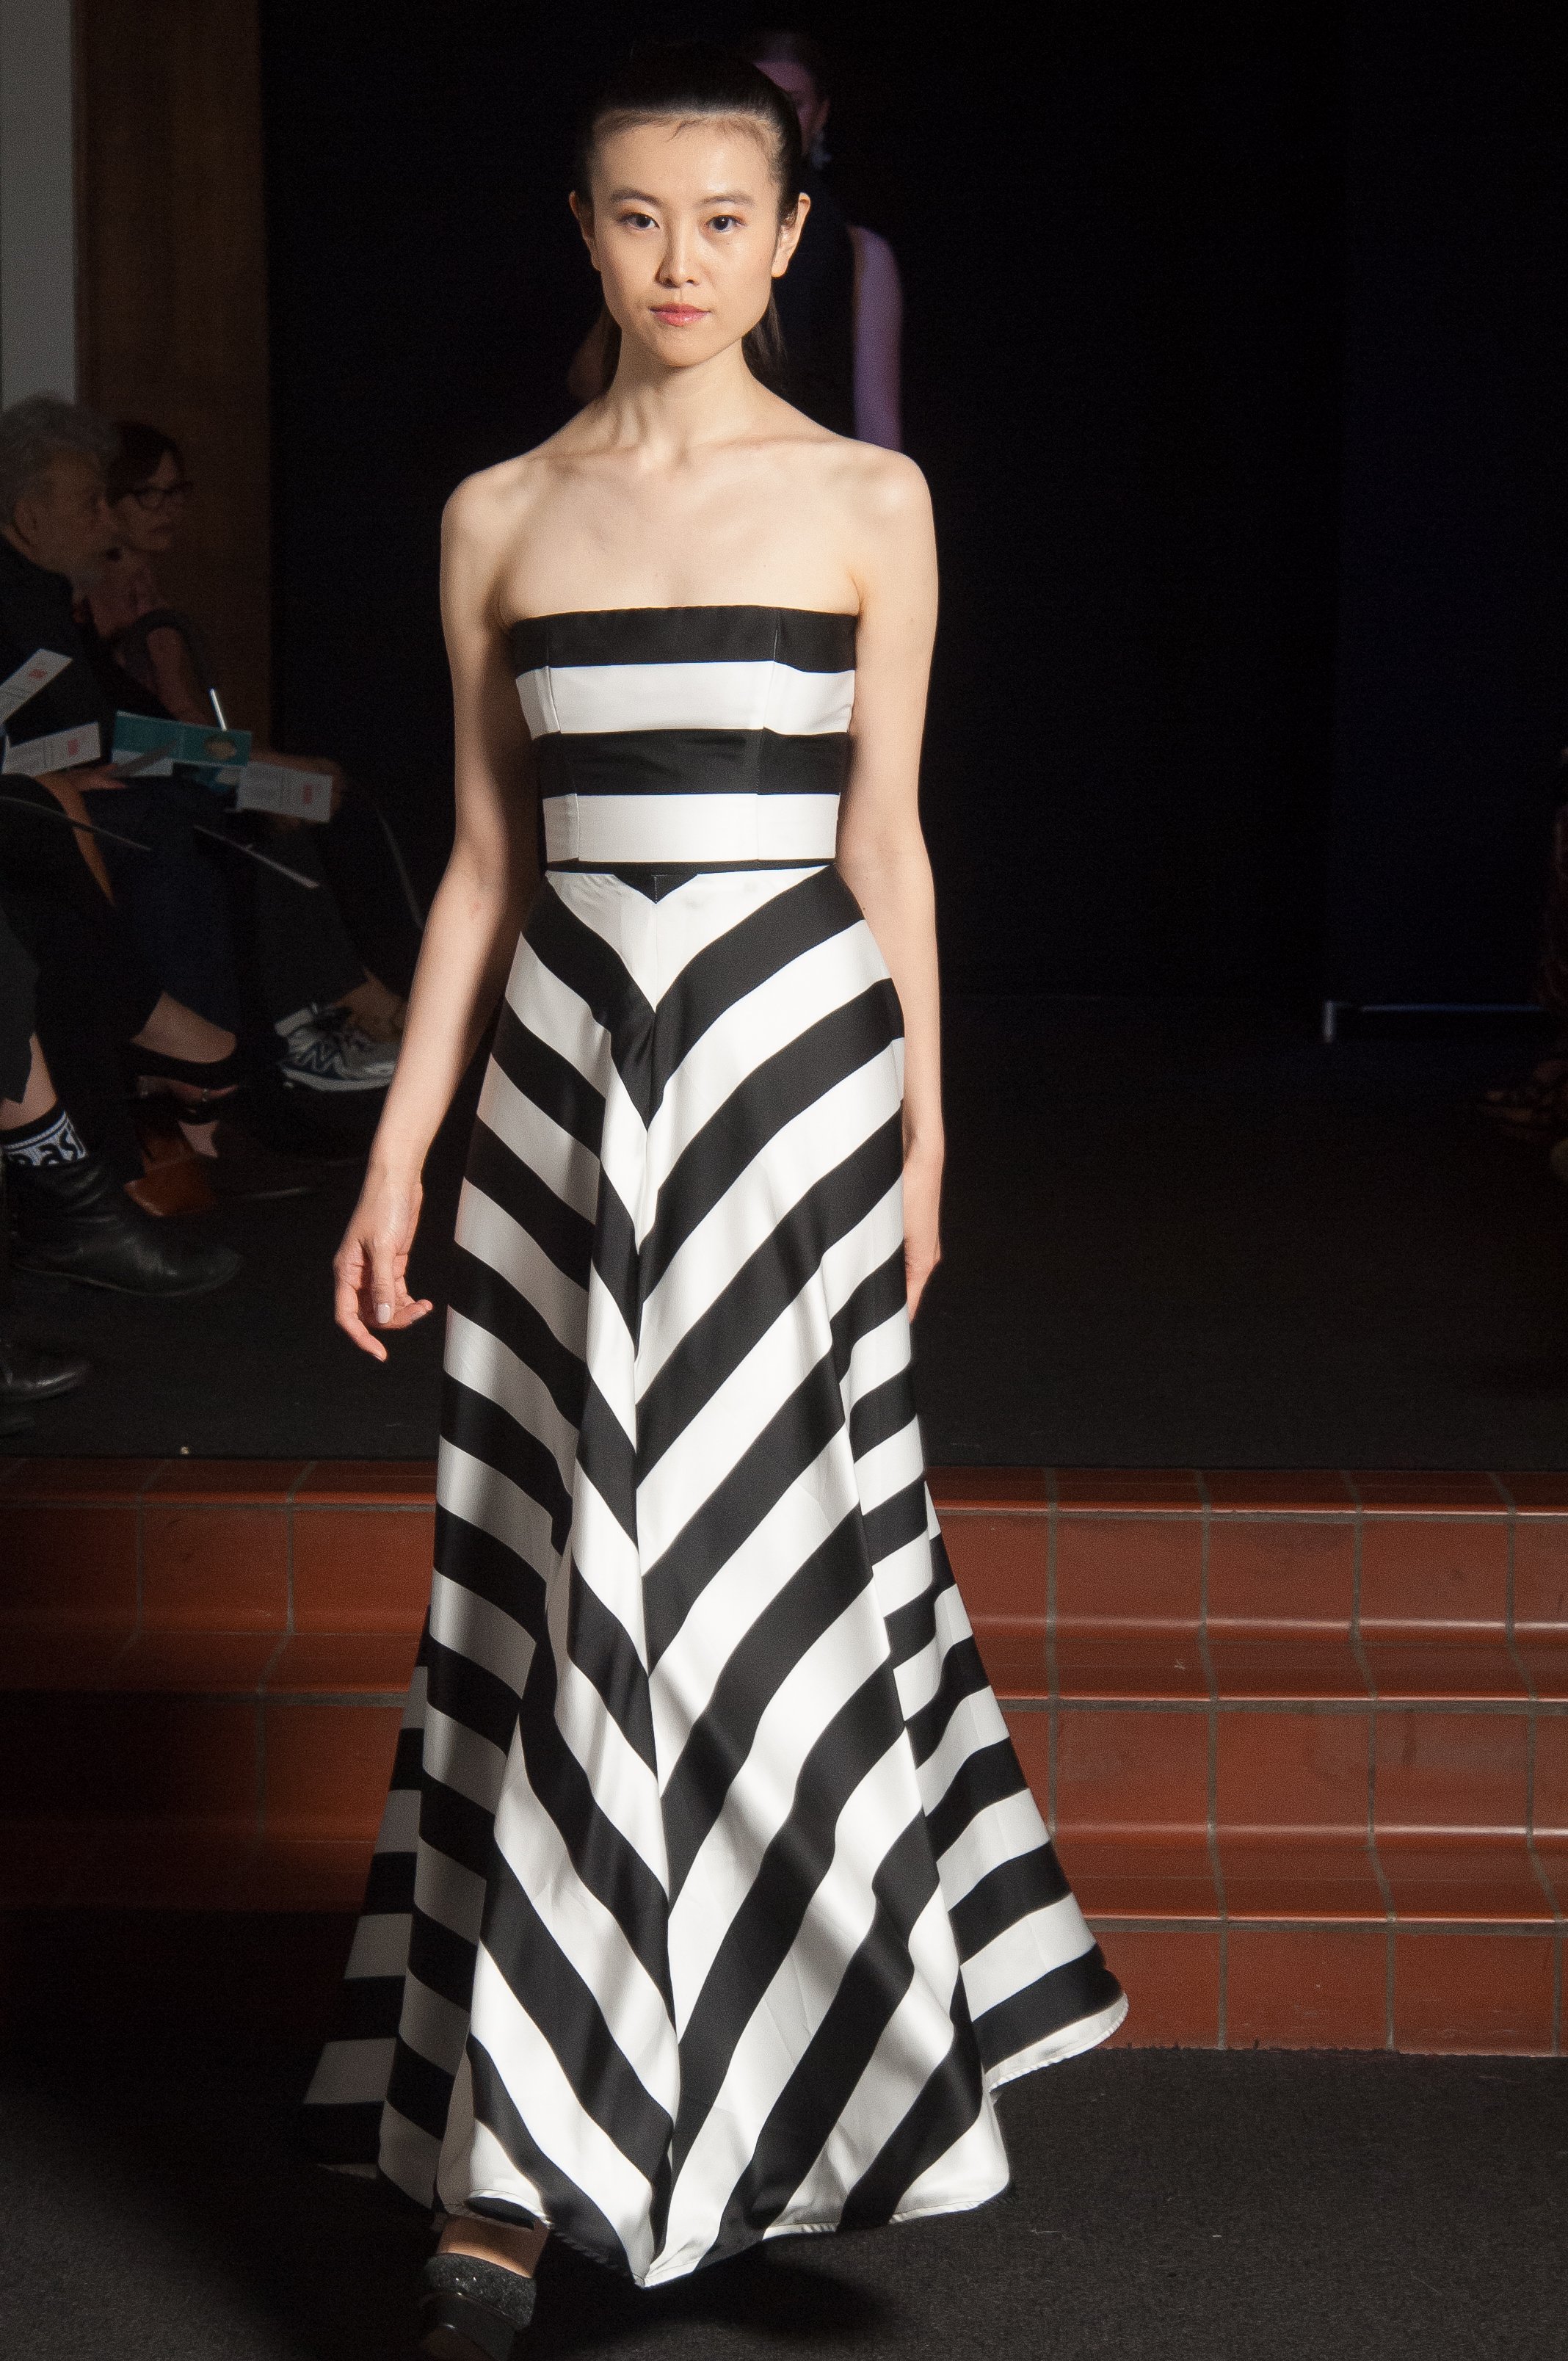 Model wearing strapless down that is black and white striped.